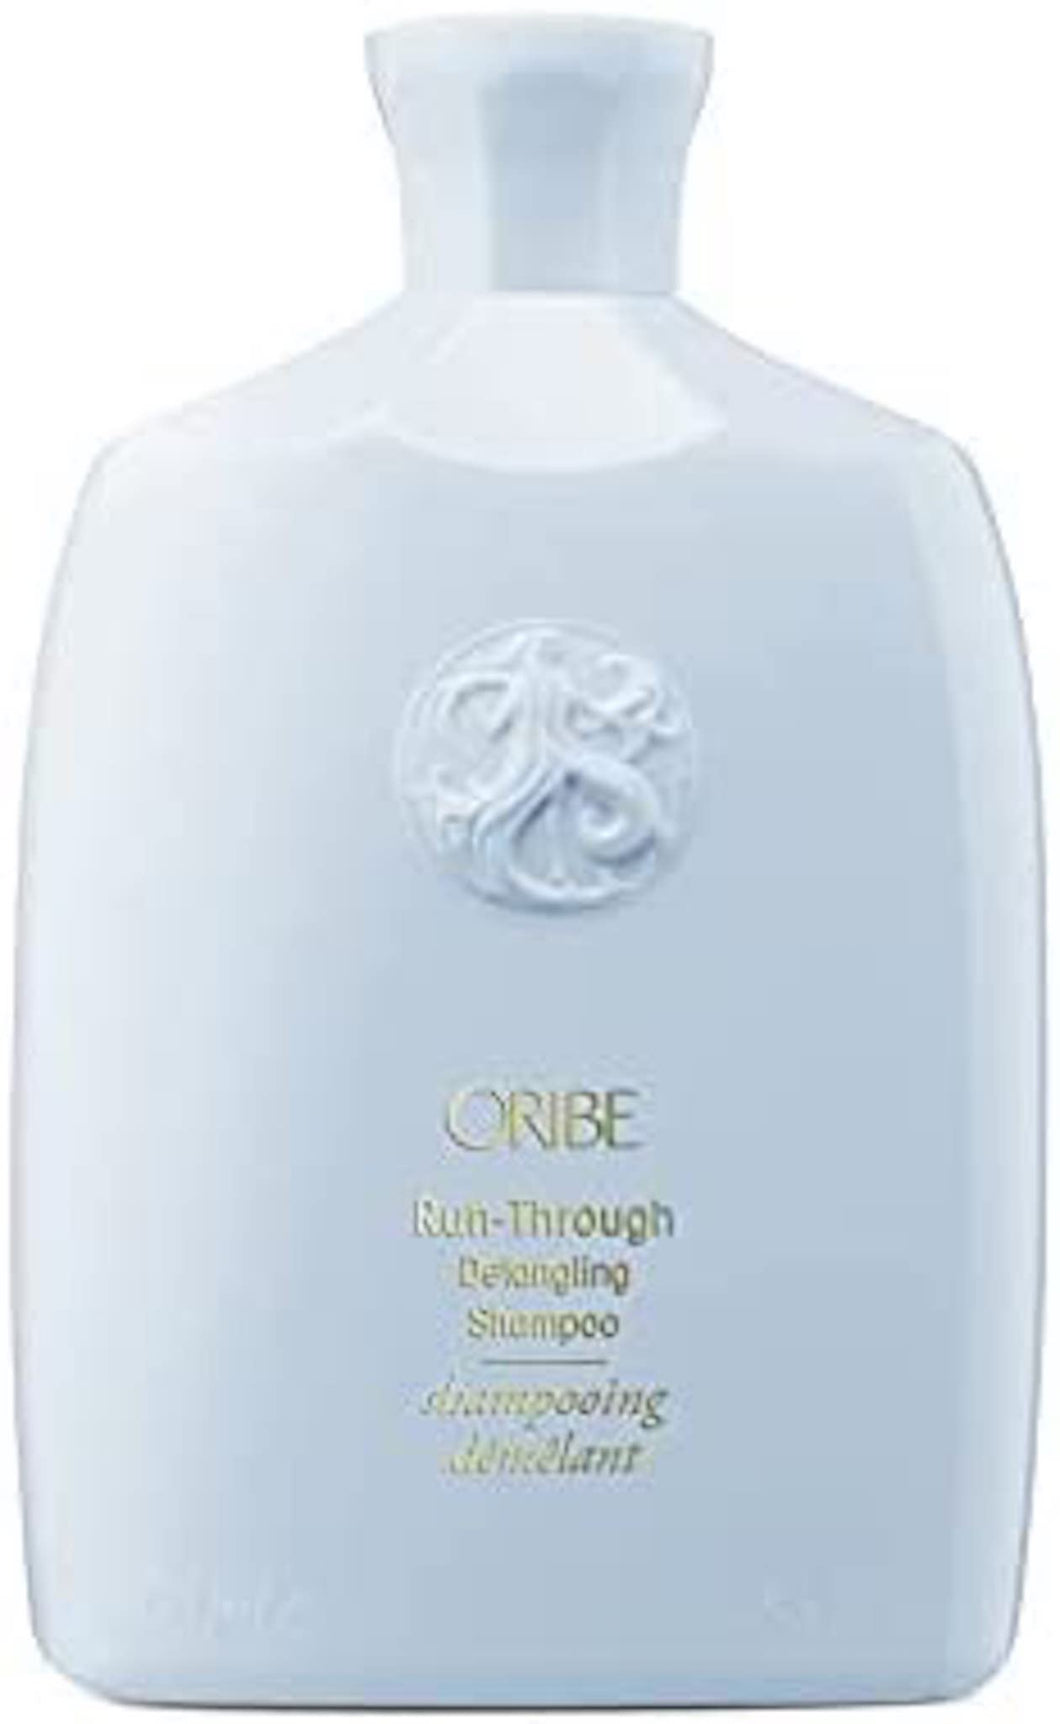 Oribe - Run through shampoo baby blue bottle with gold lettering